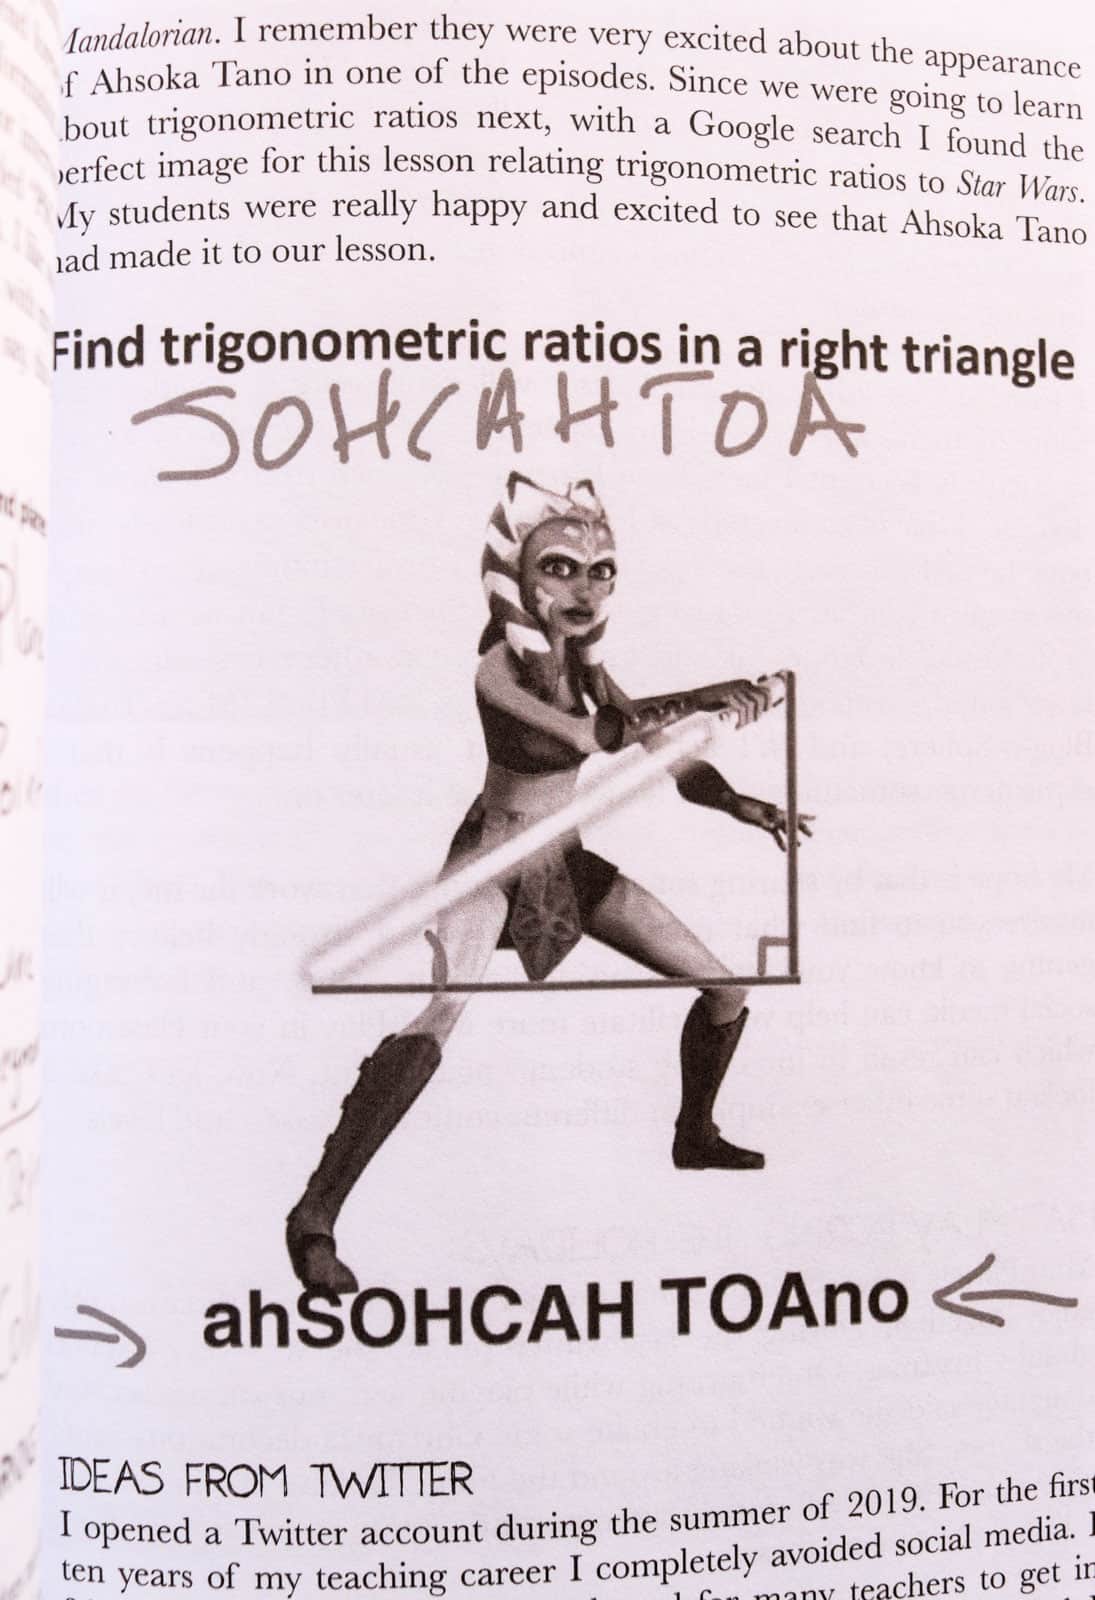 page from Math Play about Ahsoka Tano and trignometric ratios